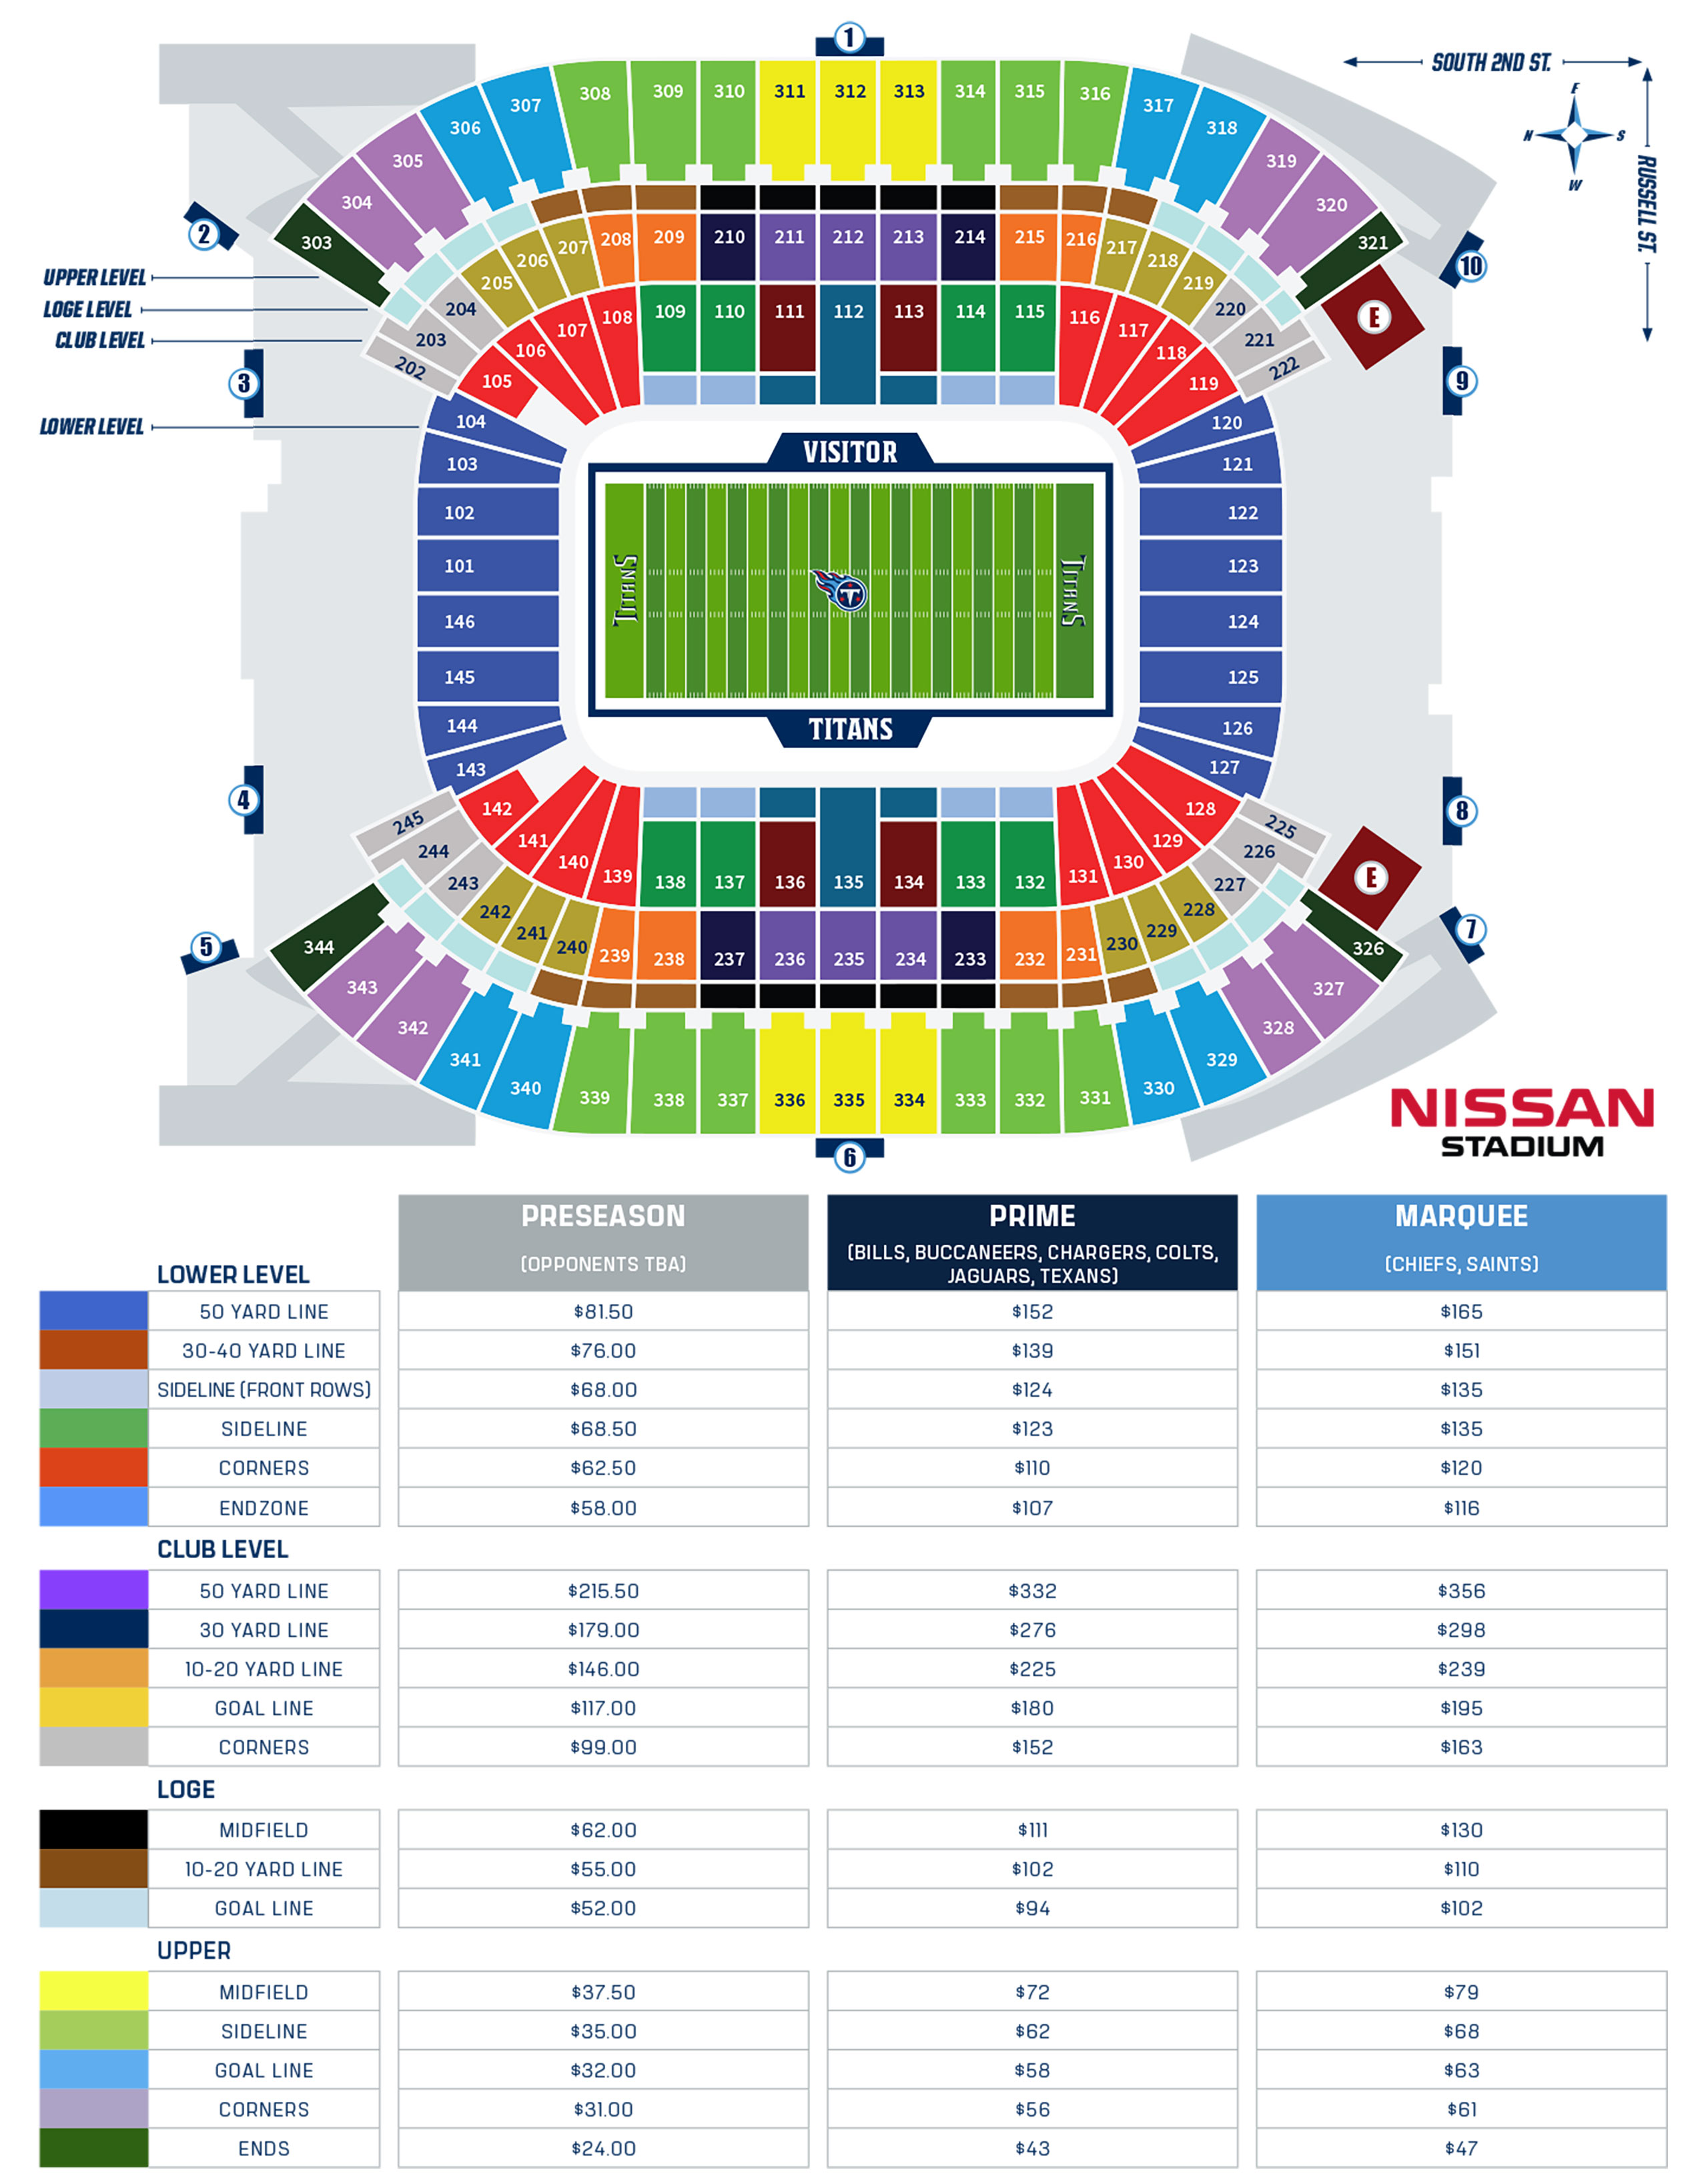 tickets for tennessee titans game